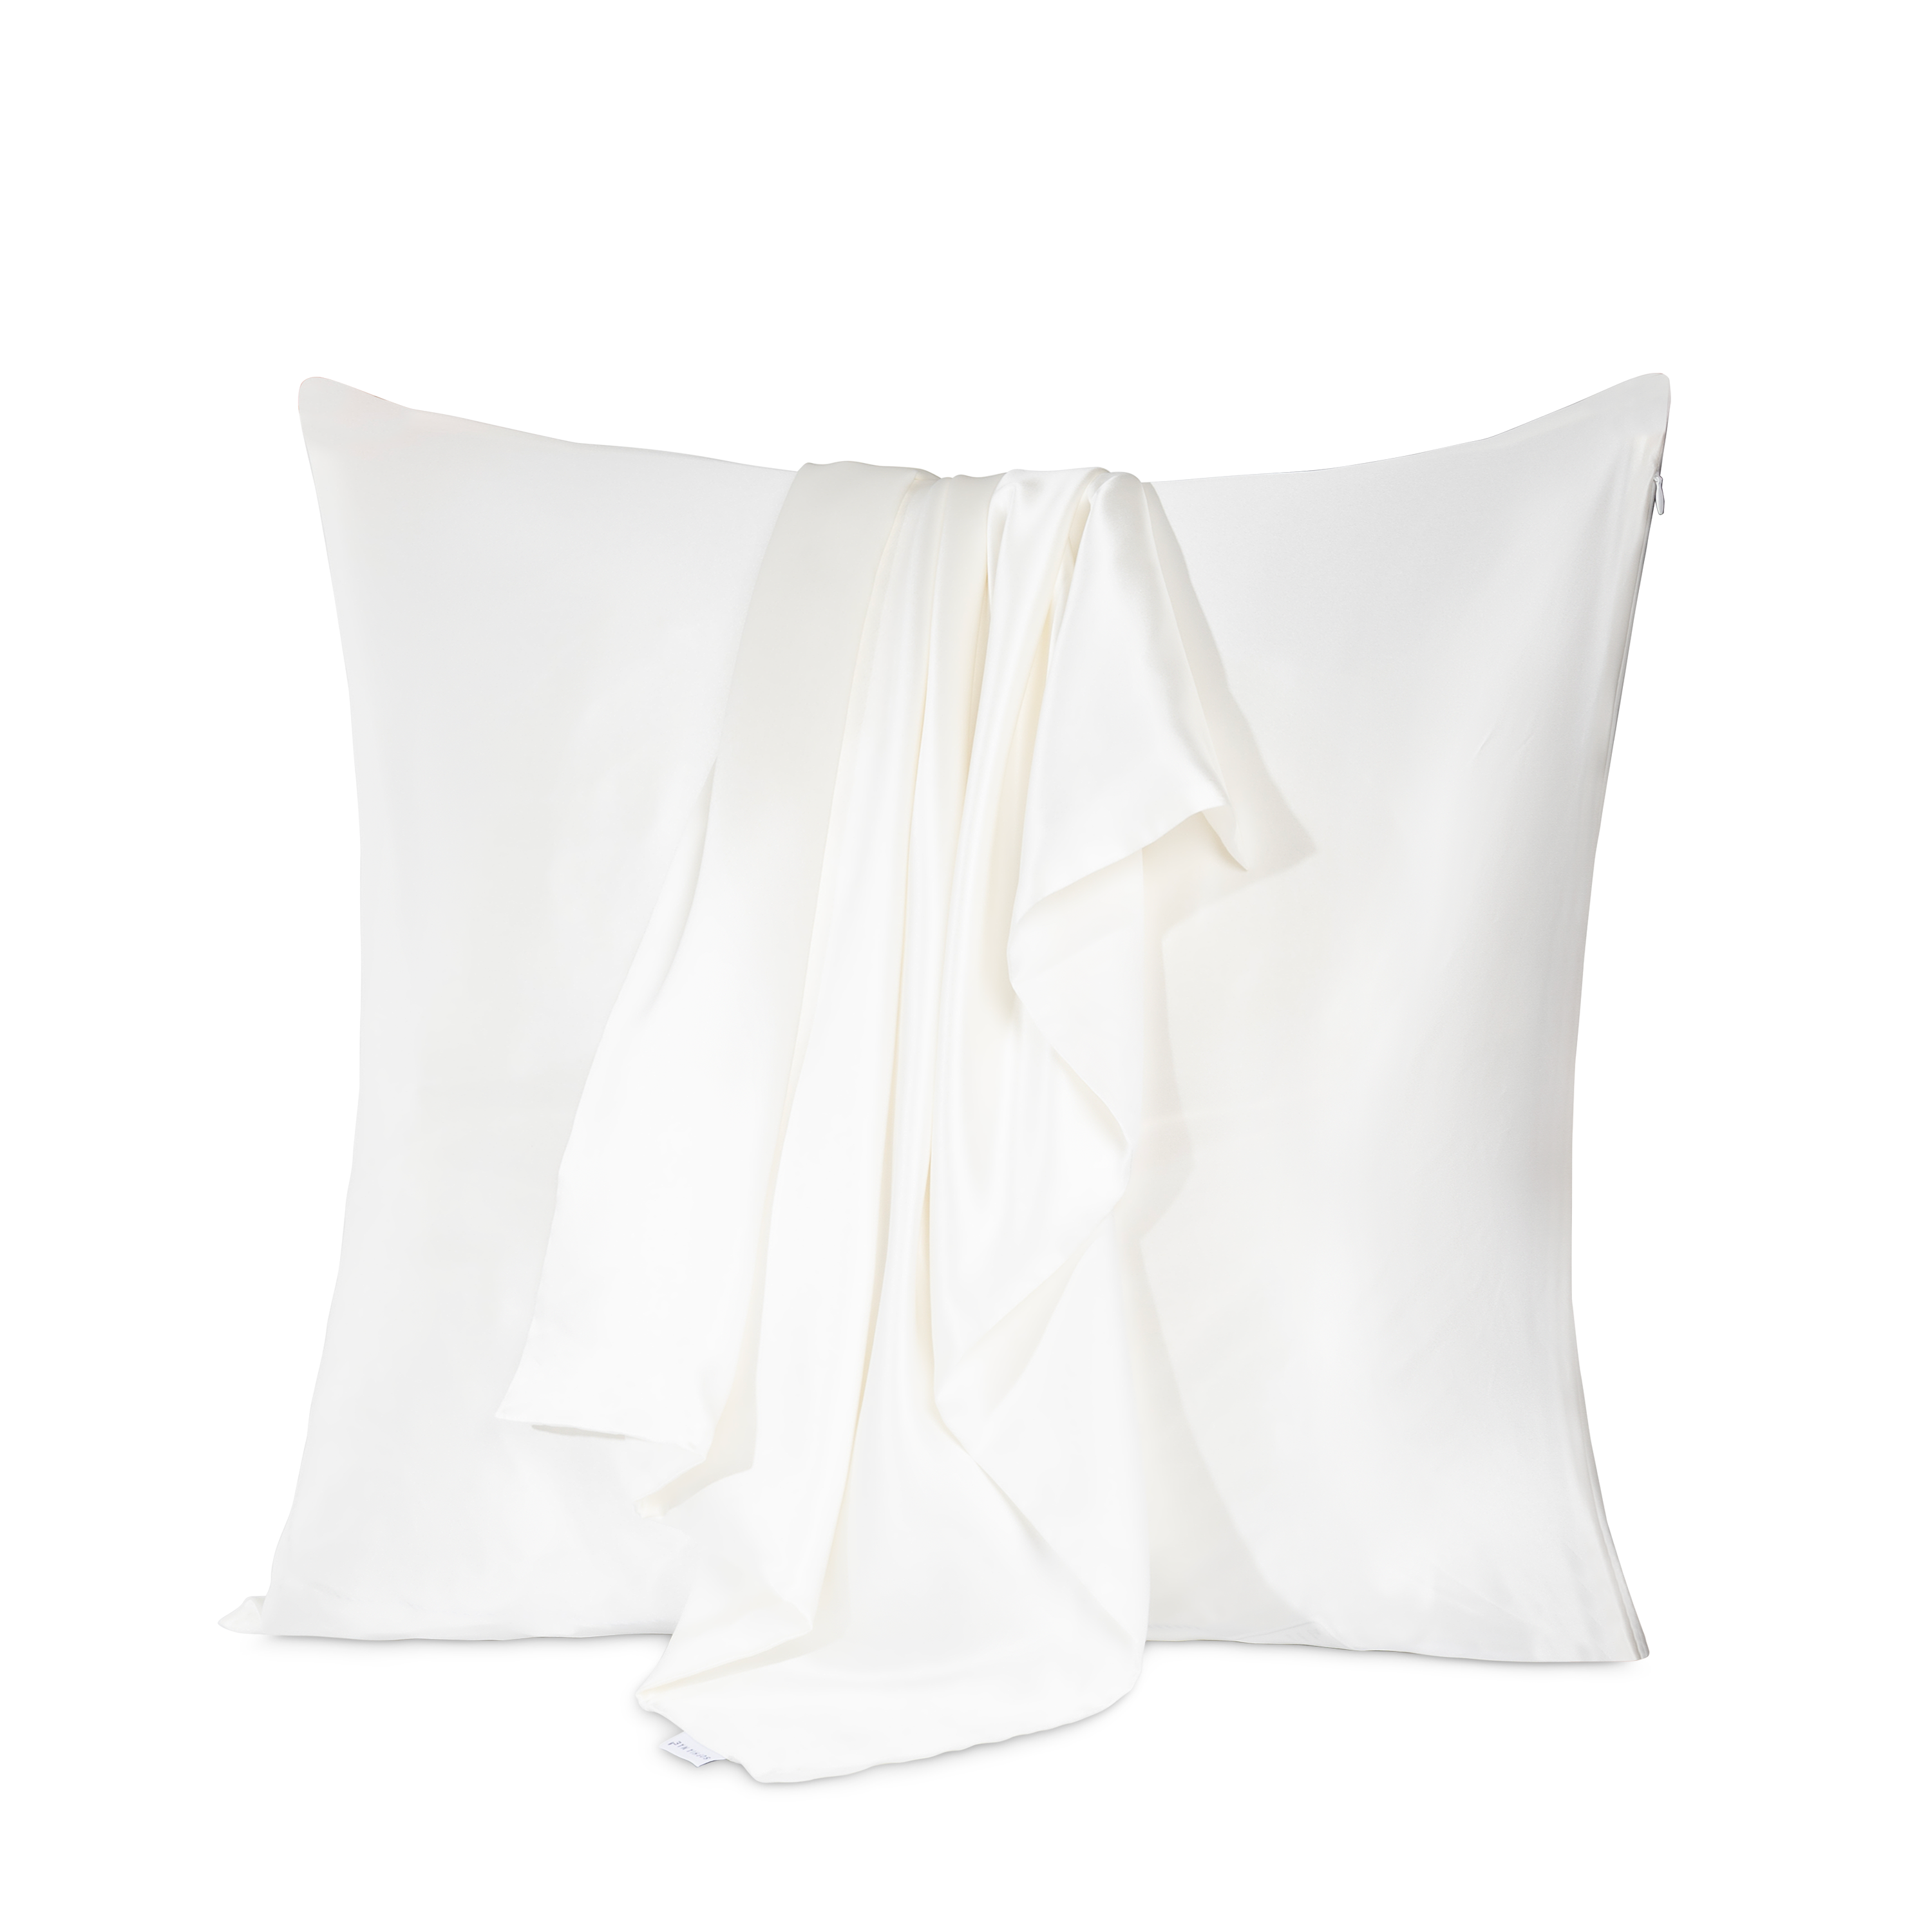 TWO-SIDED PILLOWCASE | SOPHIA MAE by Monica Geuze